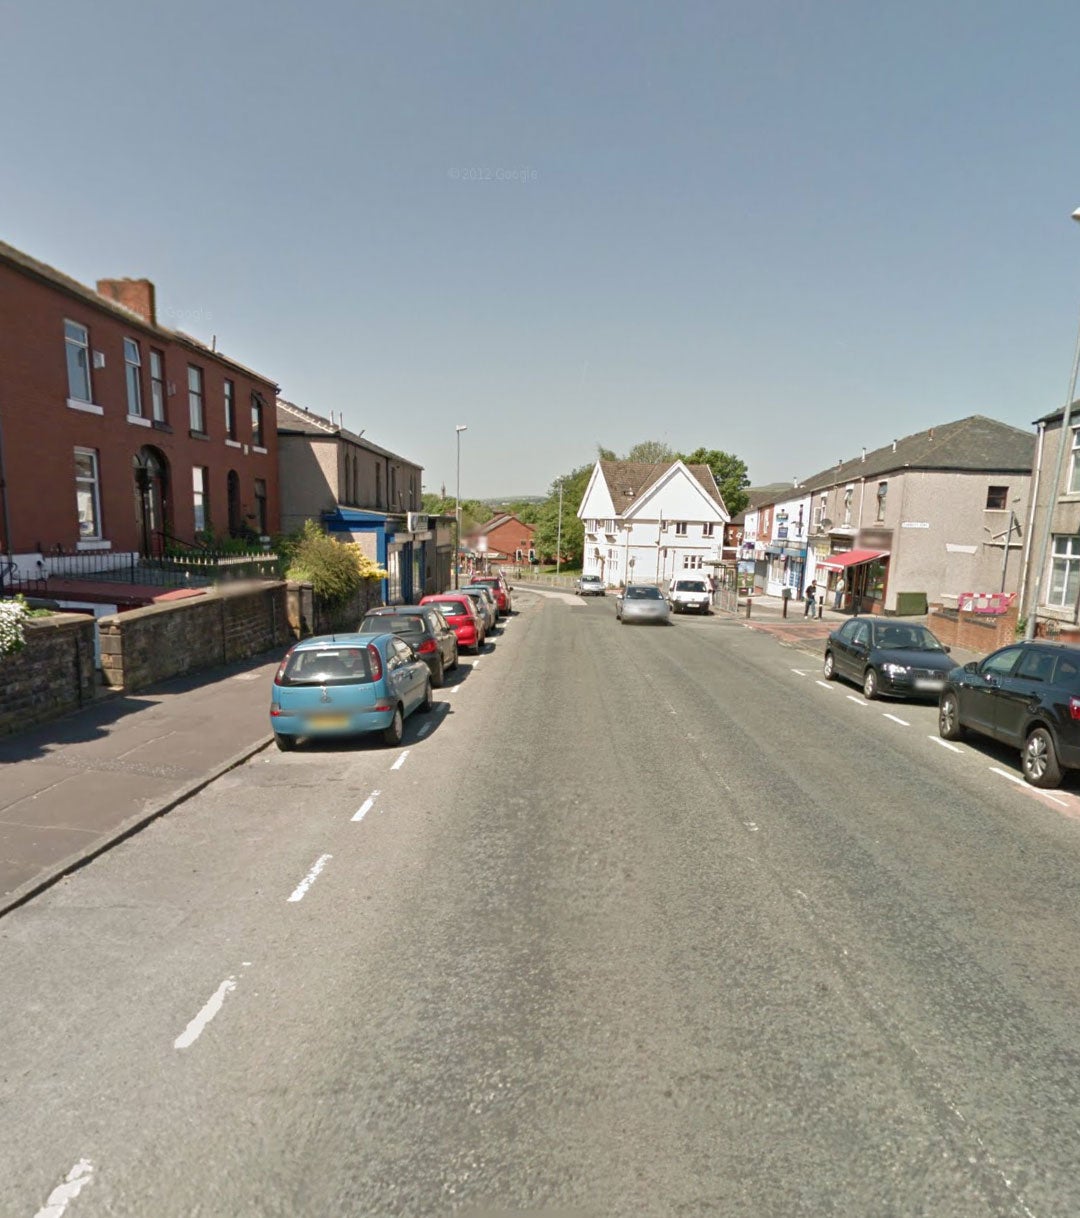 Greater Manchester police have appealed for information after a 90-year-old woman was dragged off the street on Spotland Road (pictured) as she walked to her local shop in Rochdale and raped.